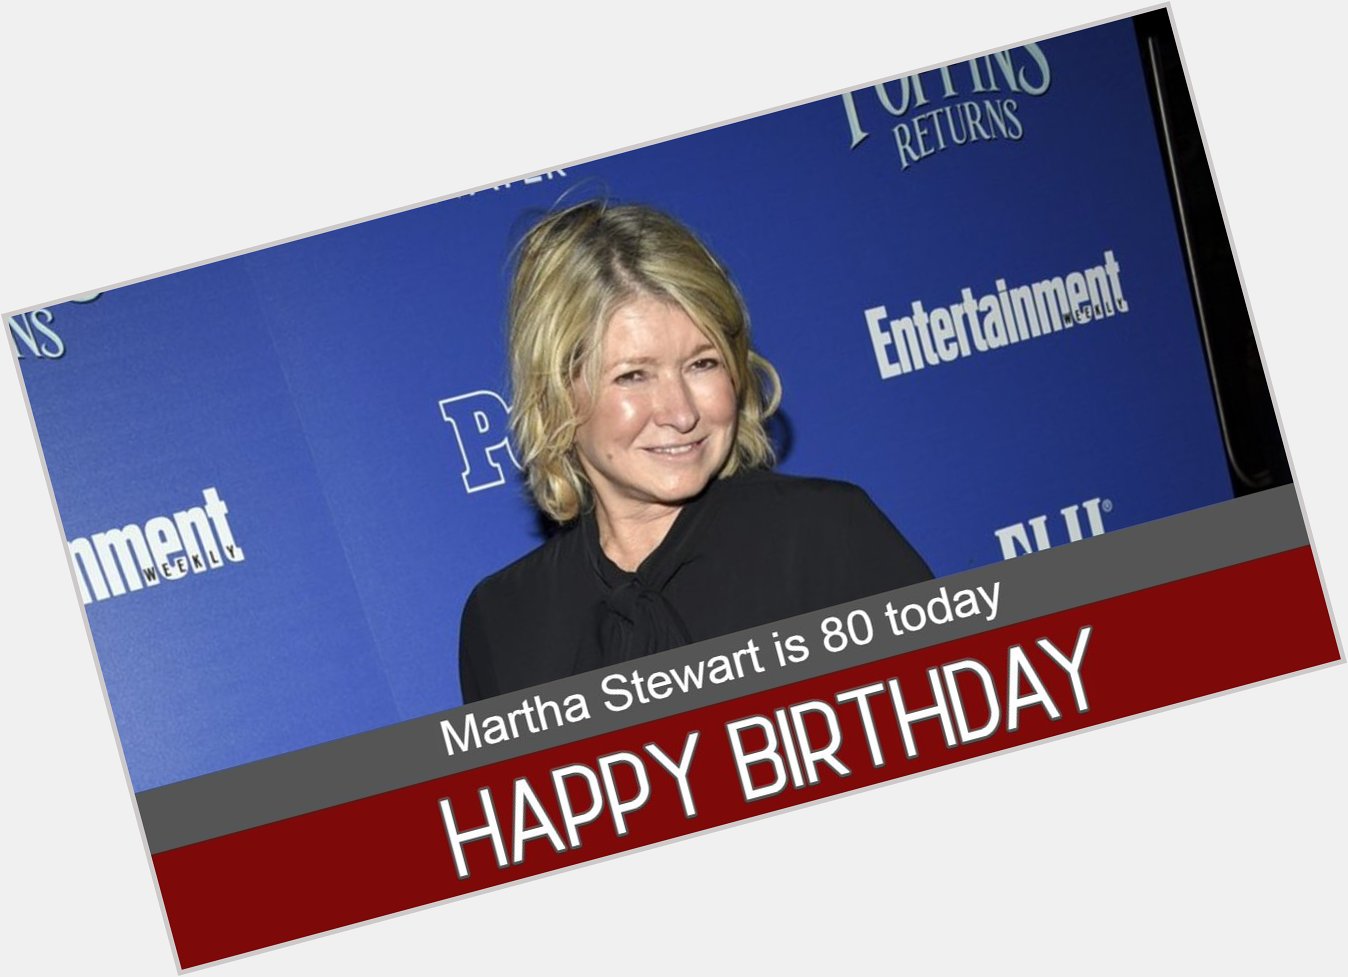 HAPPY BIRTHDAY: Martha Stewart is still going strong at age 80 today. 